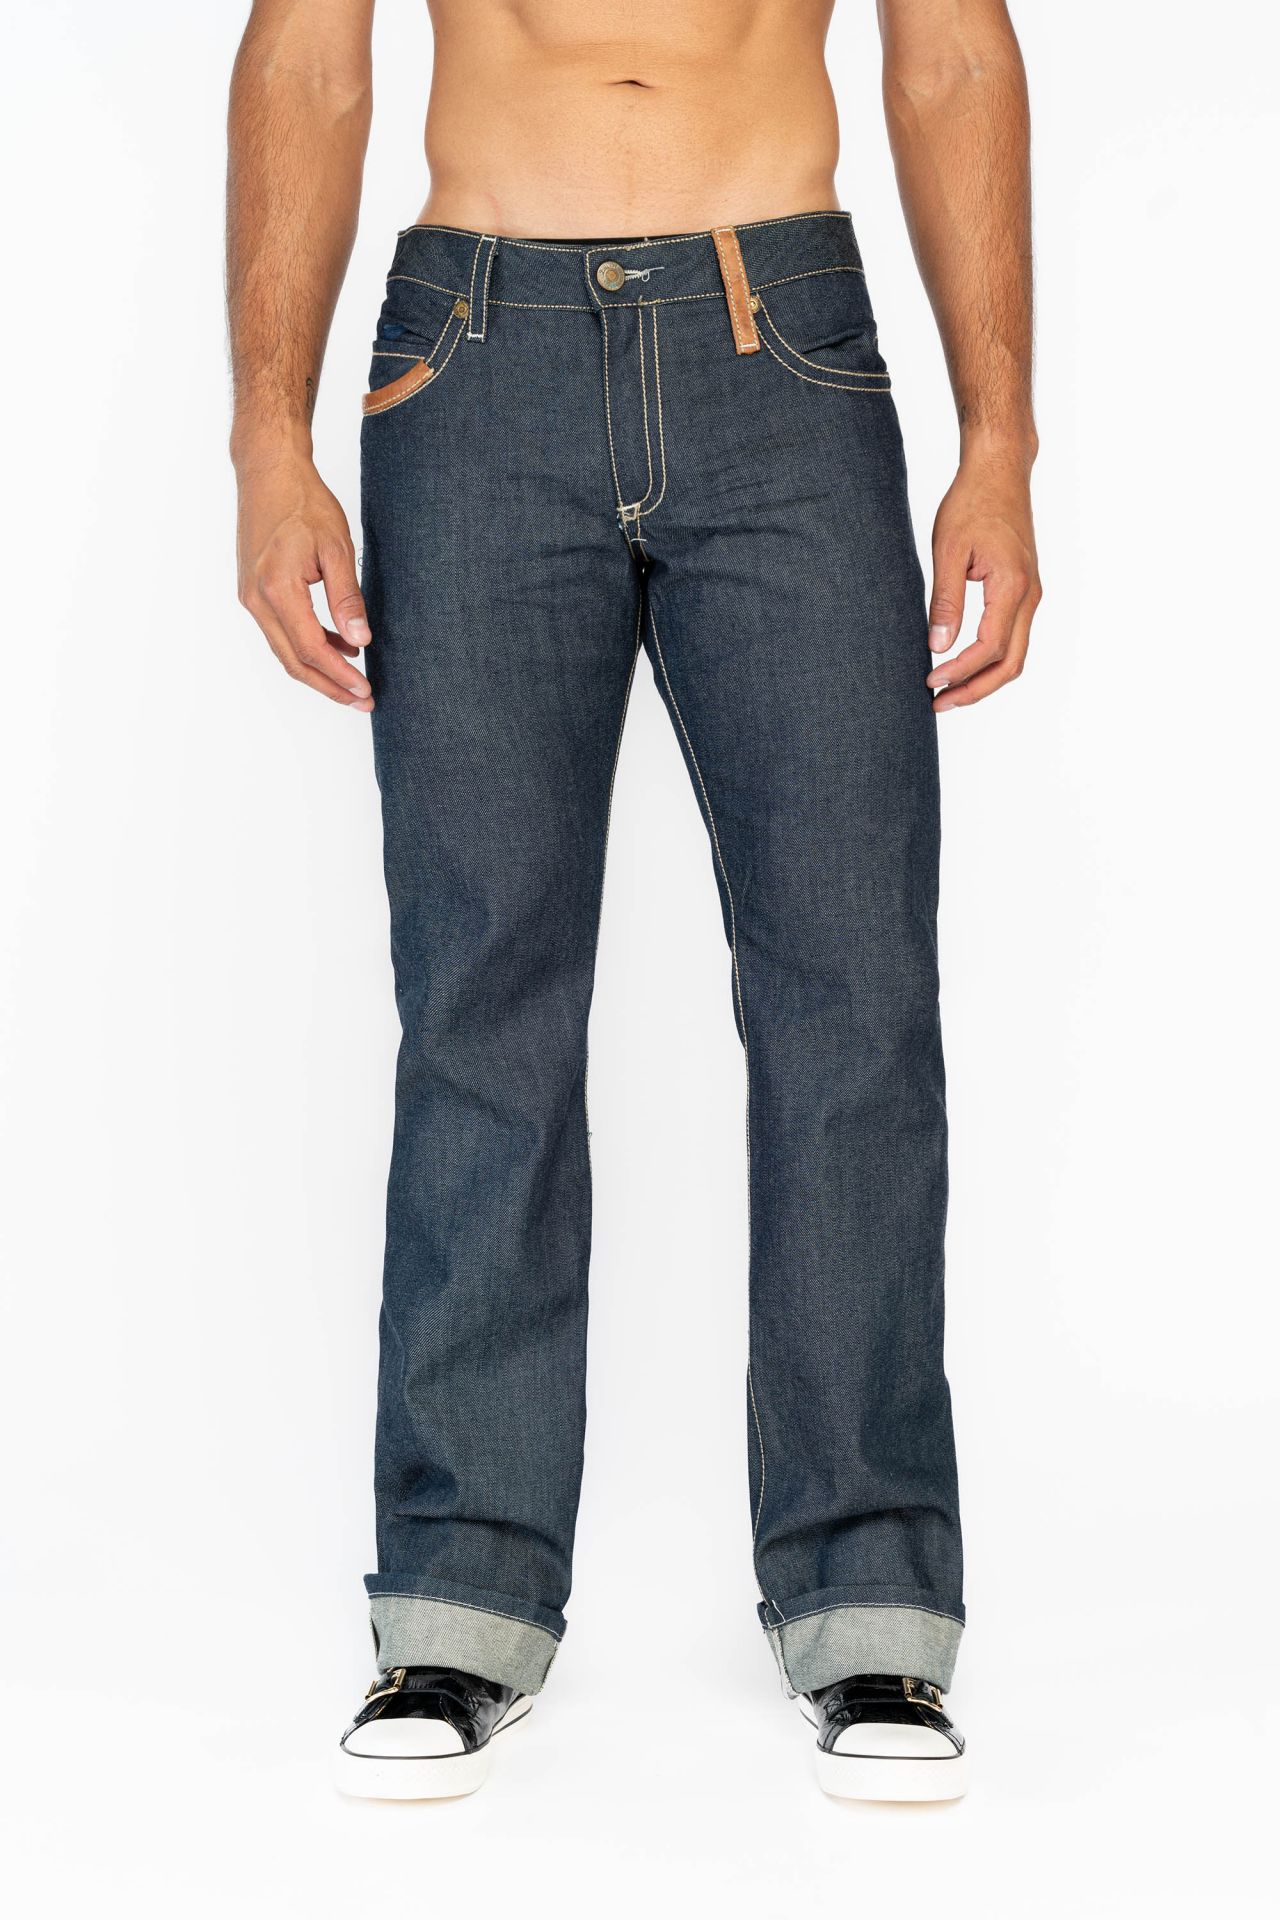 RAW DENIM COLLECTION MENS BOOTCUT JEANS WITH LEATHER INSERTS IN INDIGO RAW